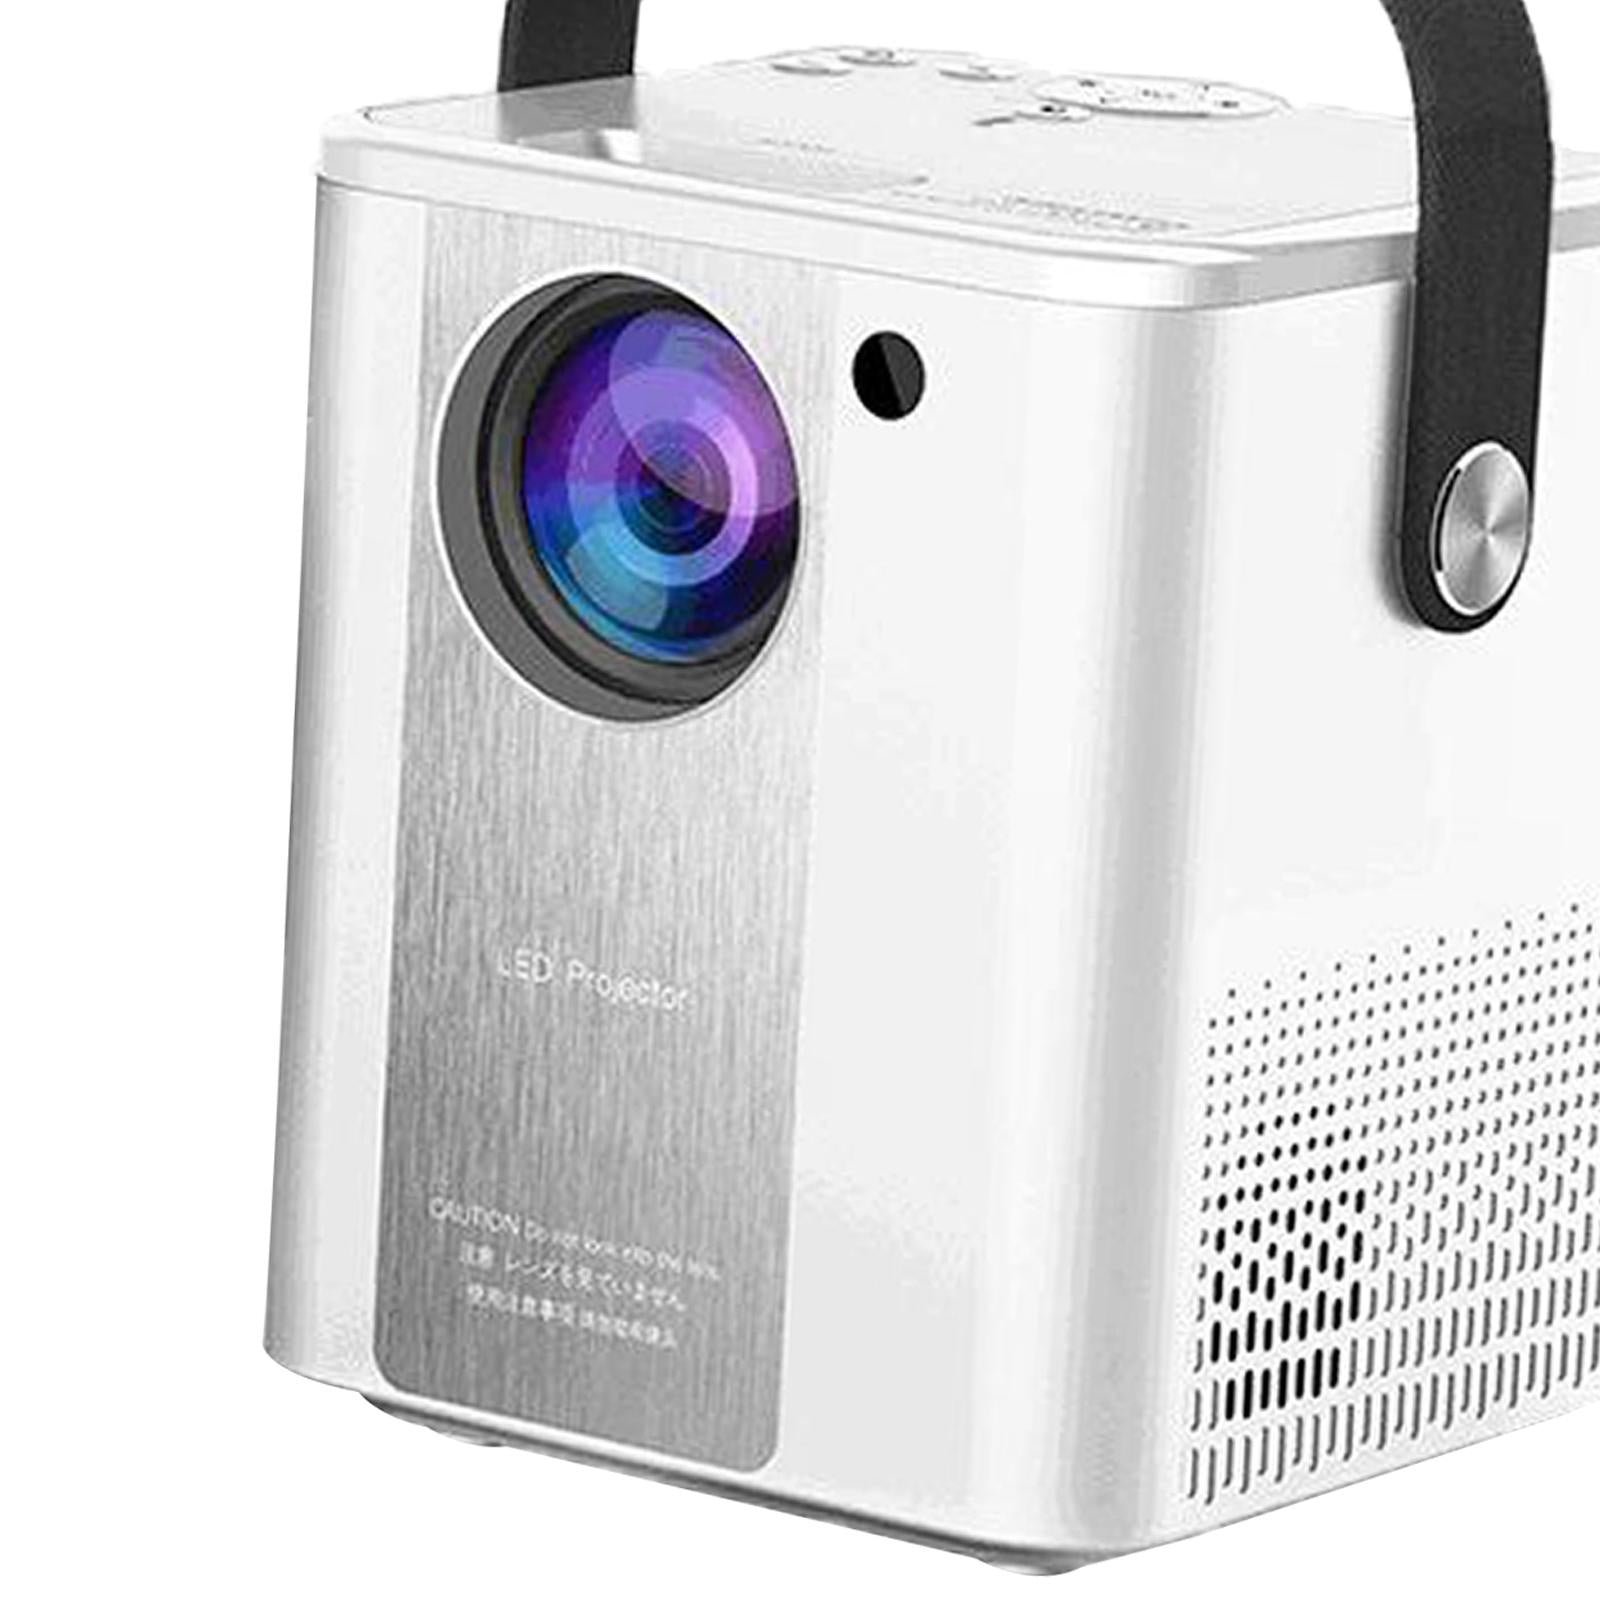 C500 Portable Projector Mobile Phone Home Theater Pocket Sized for Office Type A